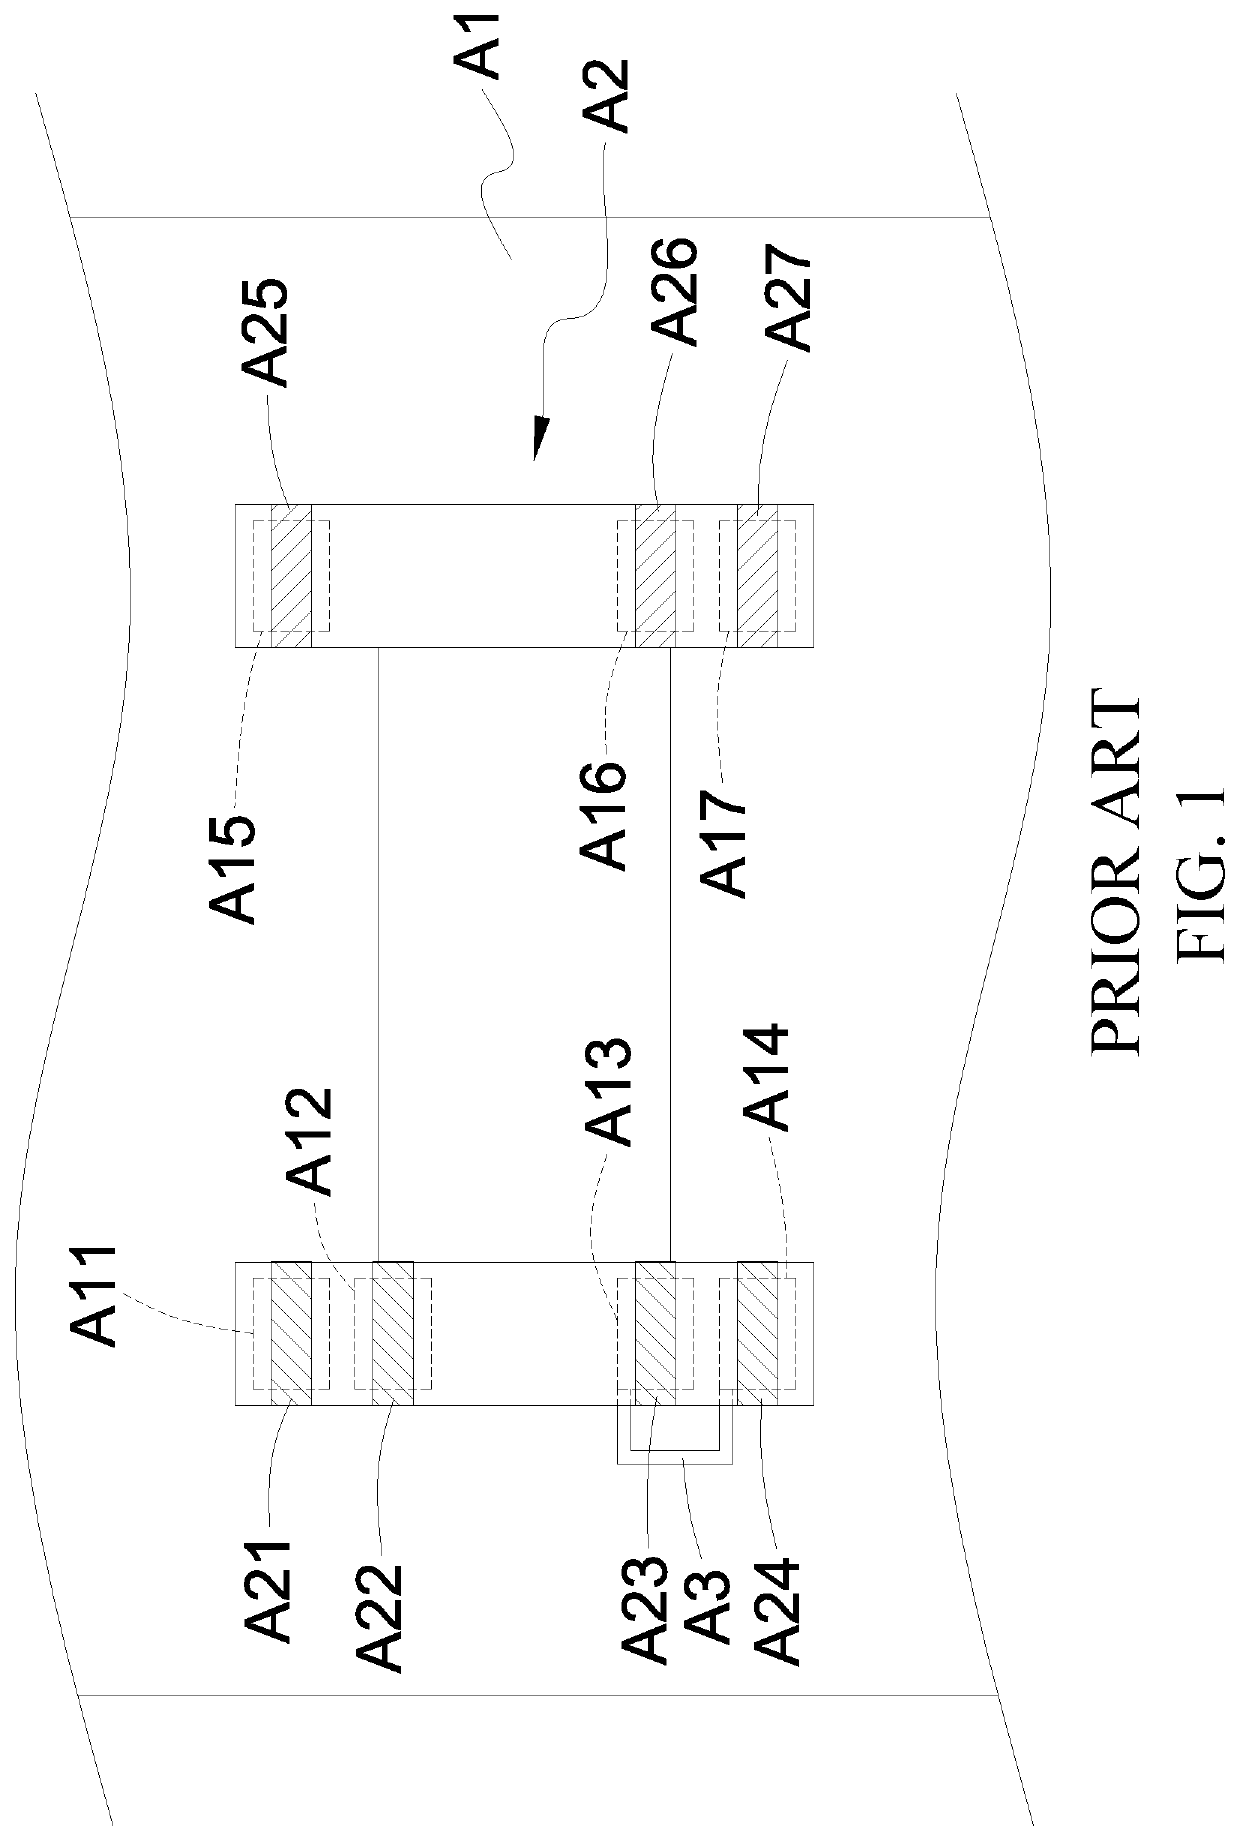 Inductor magnetic-core structure